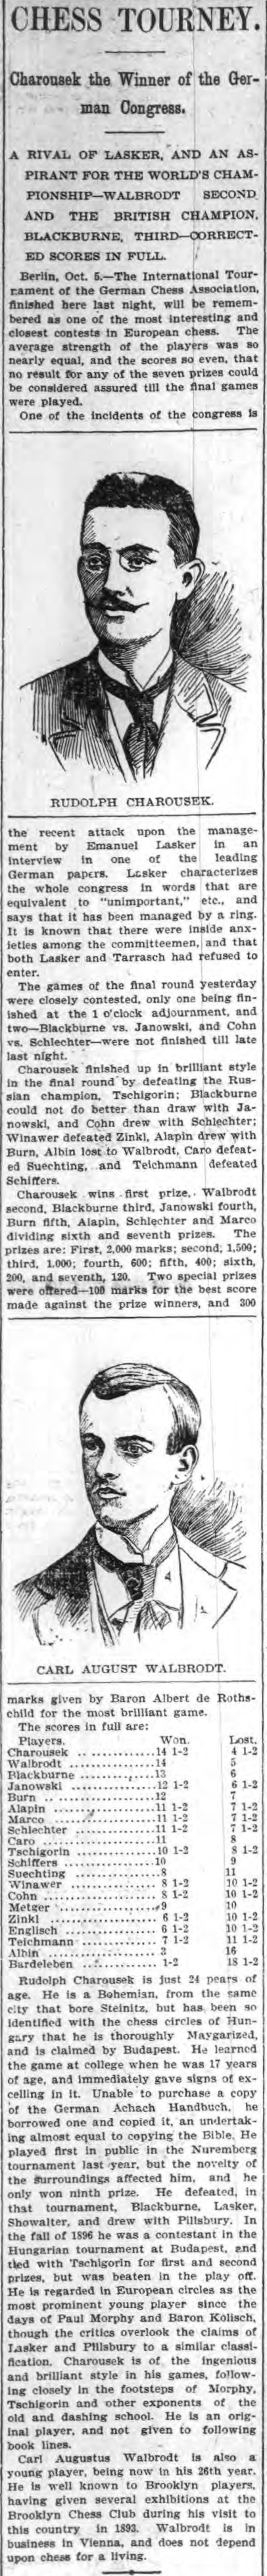 1897.10.05-01 Brooklyn Daily Standard-Union.png